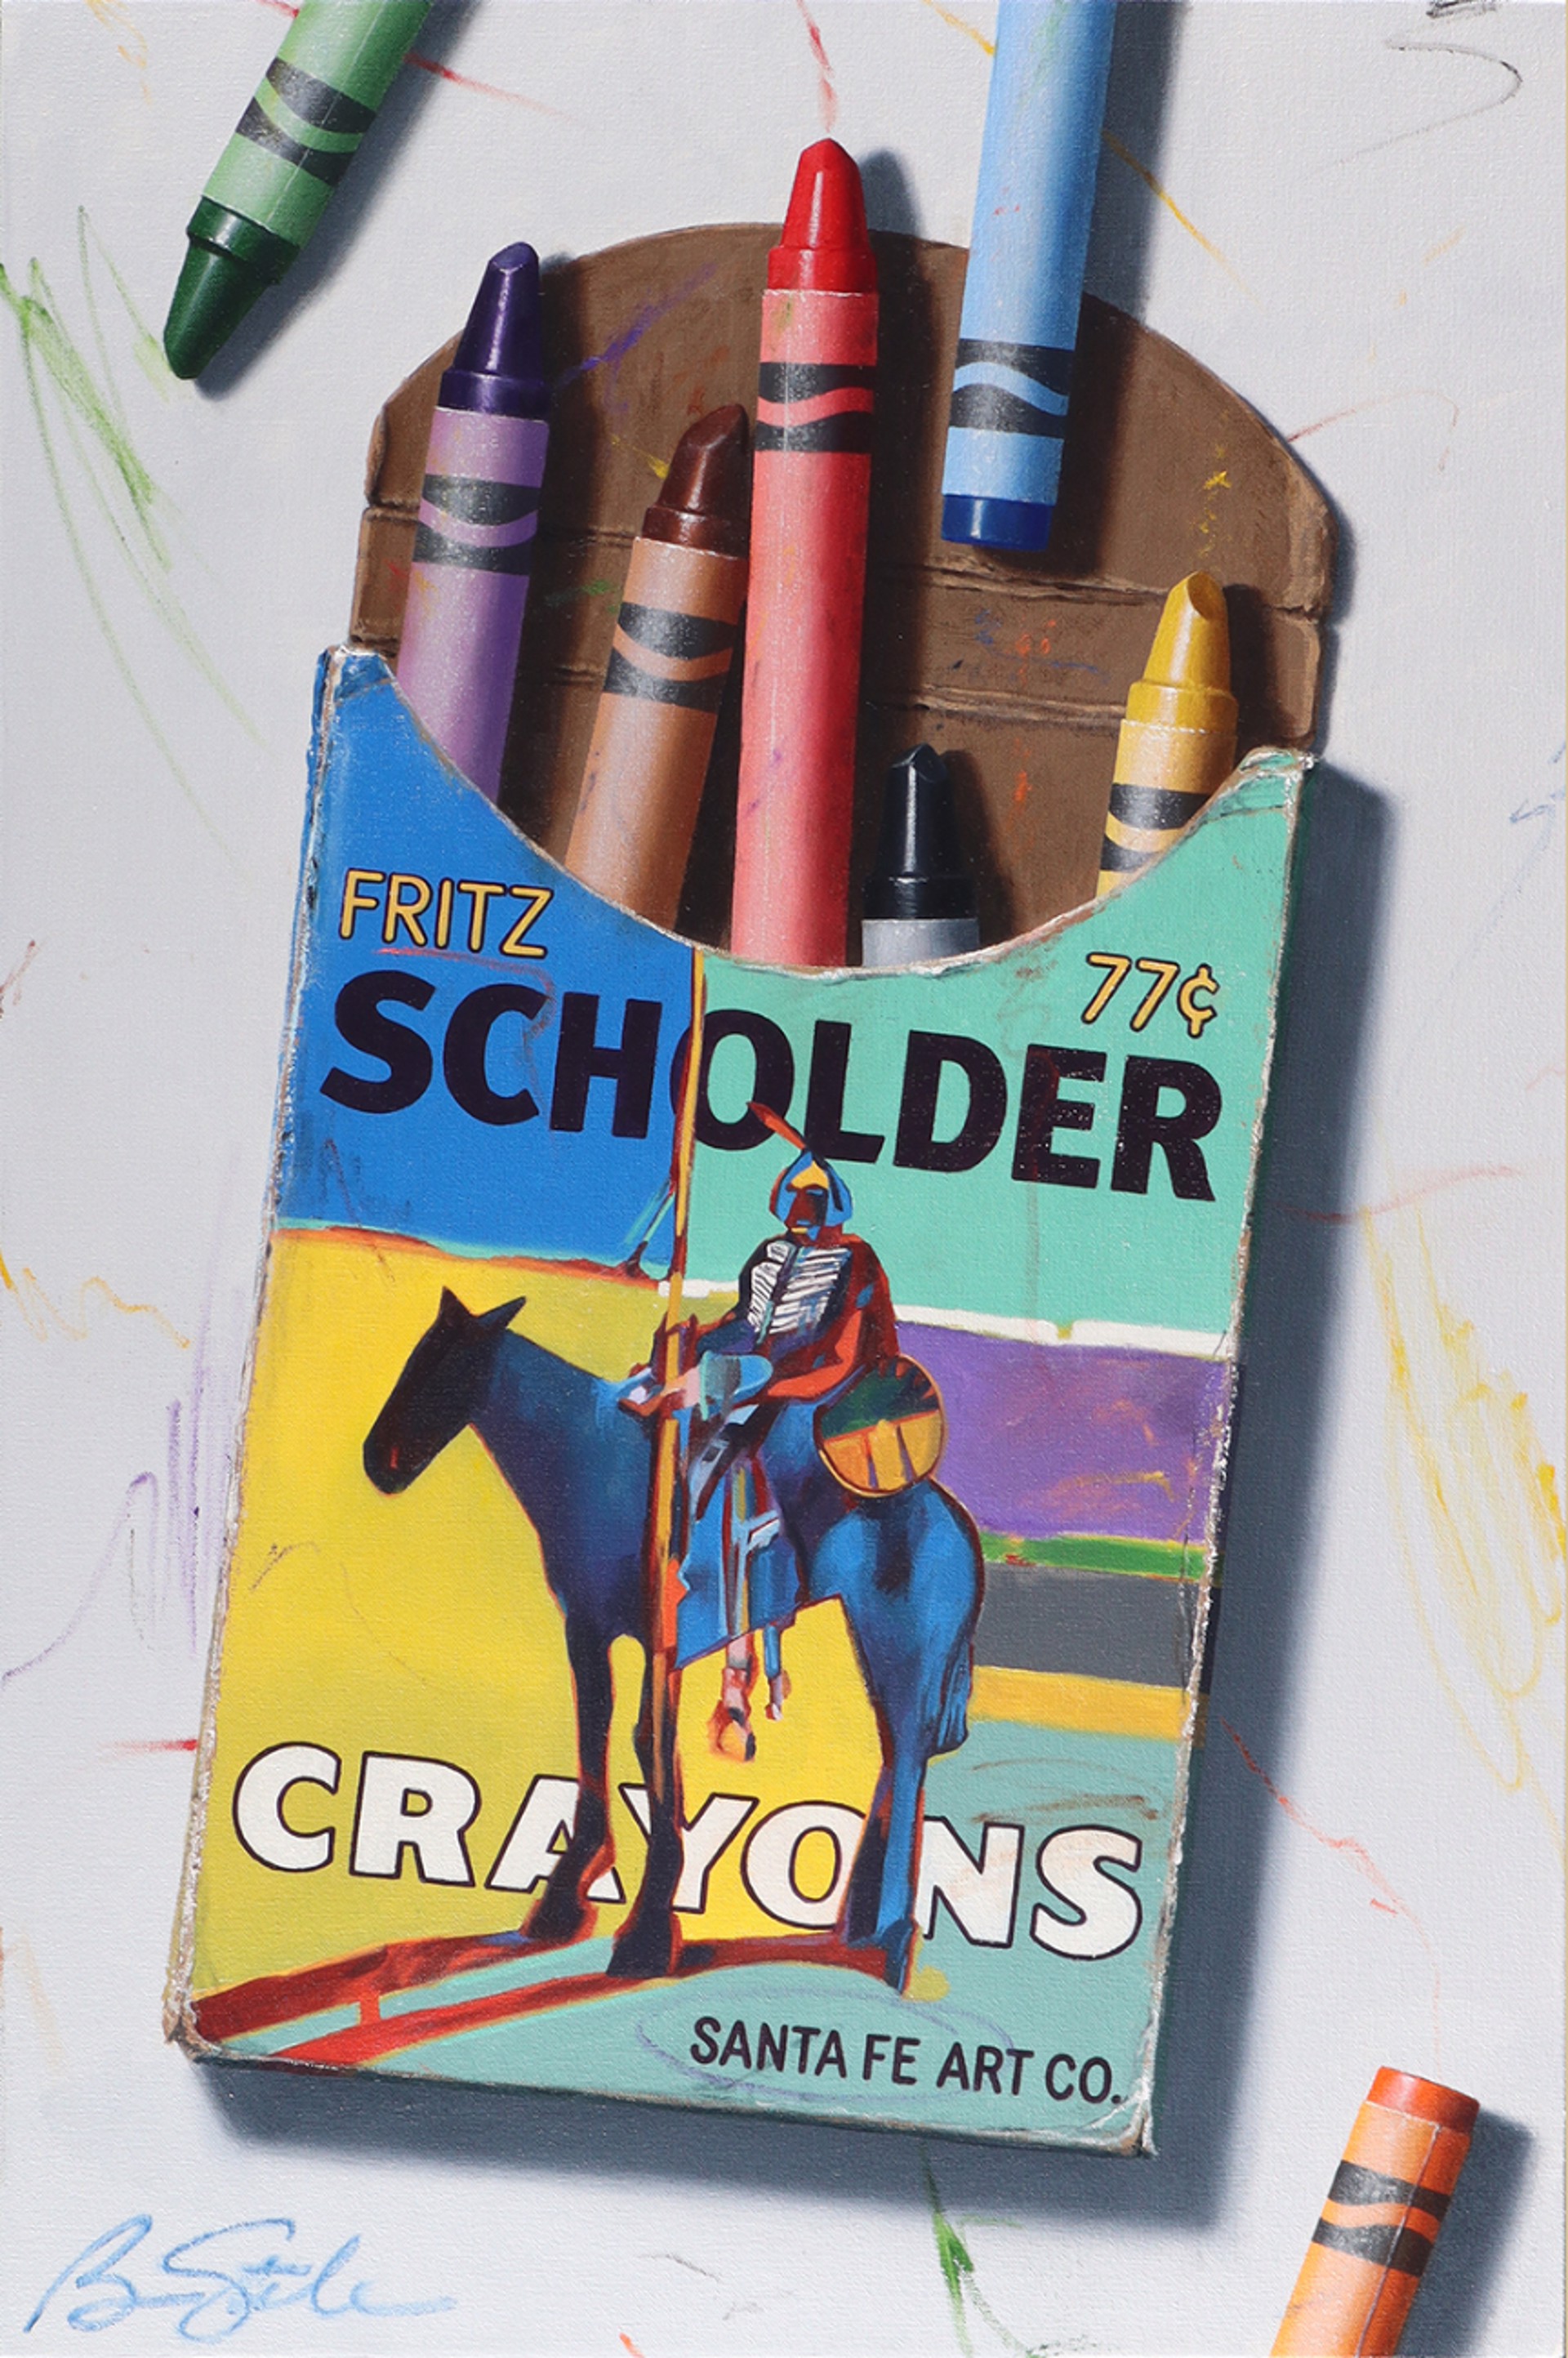 Fritz Crayons by Ben Steele